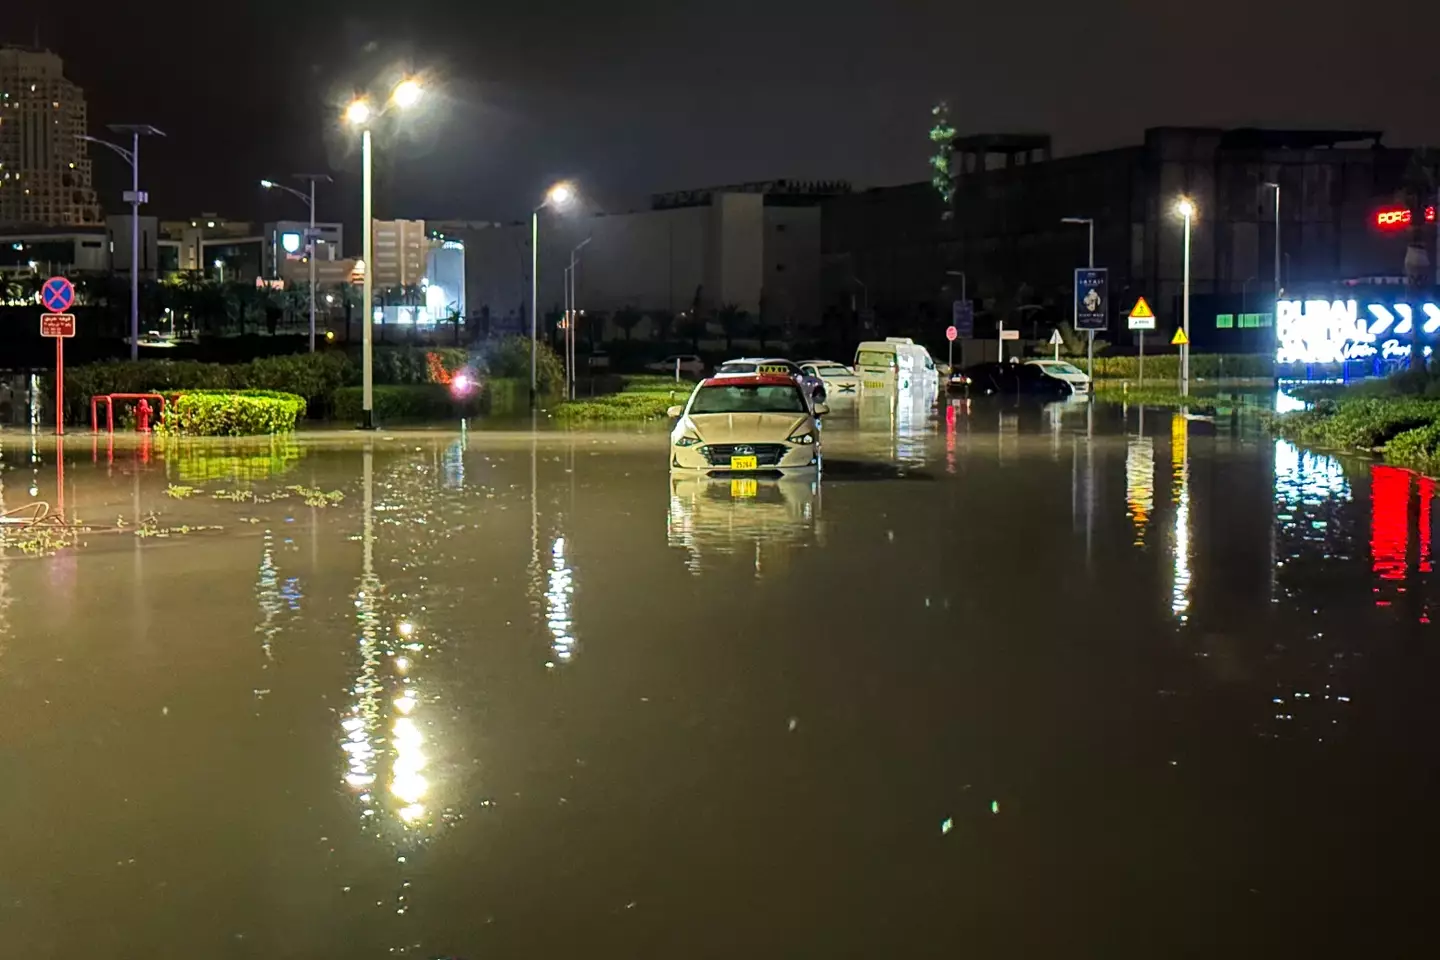 Vehicles have been left stranded in the streets (GIUSEPPE CACACE/AFP via Getty Images) 